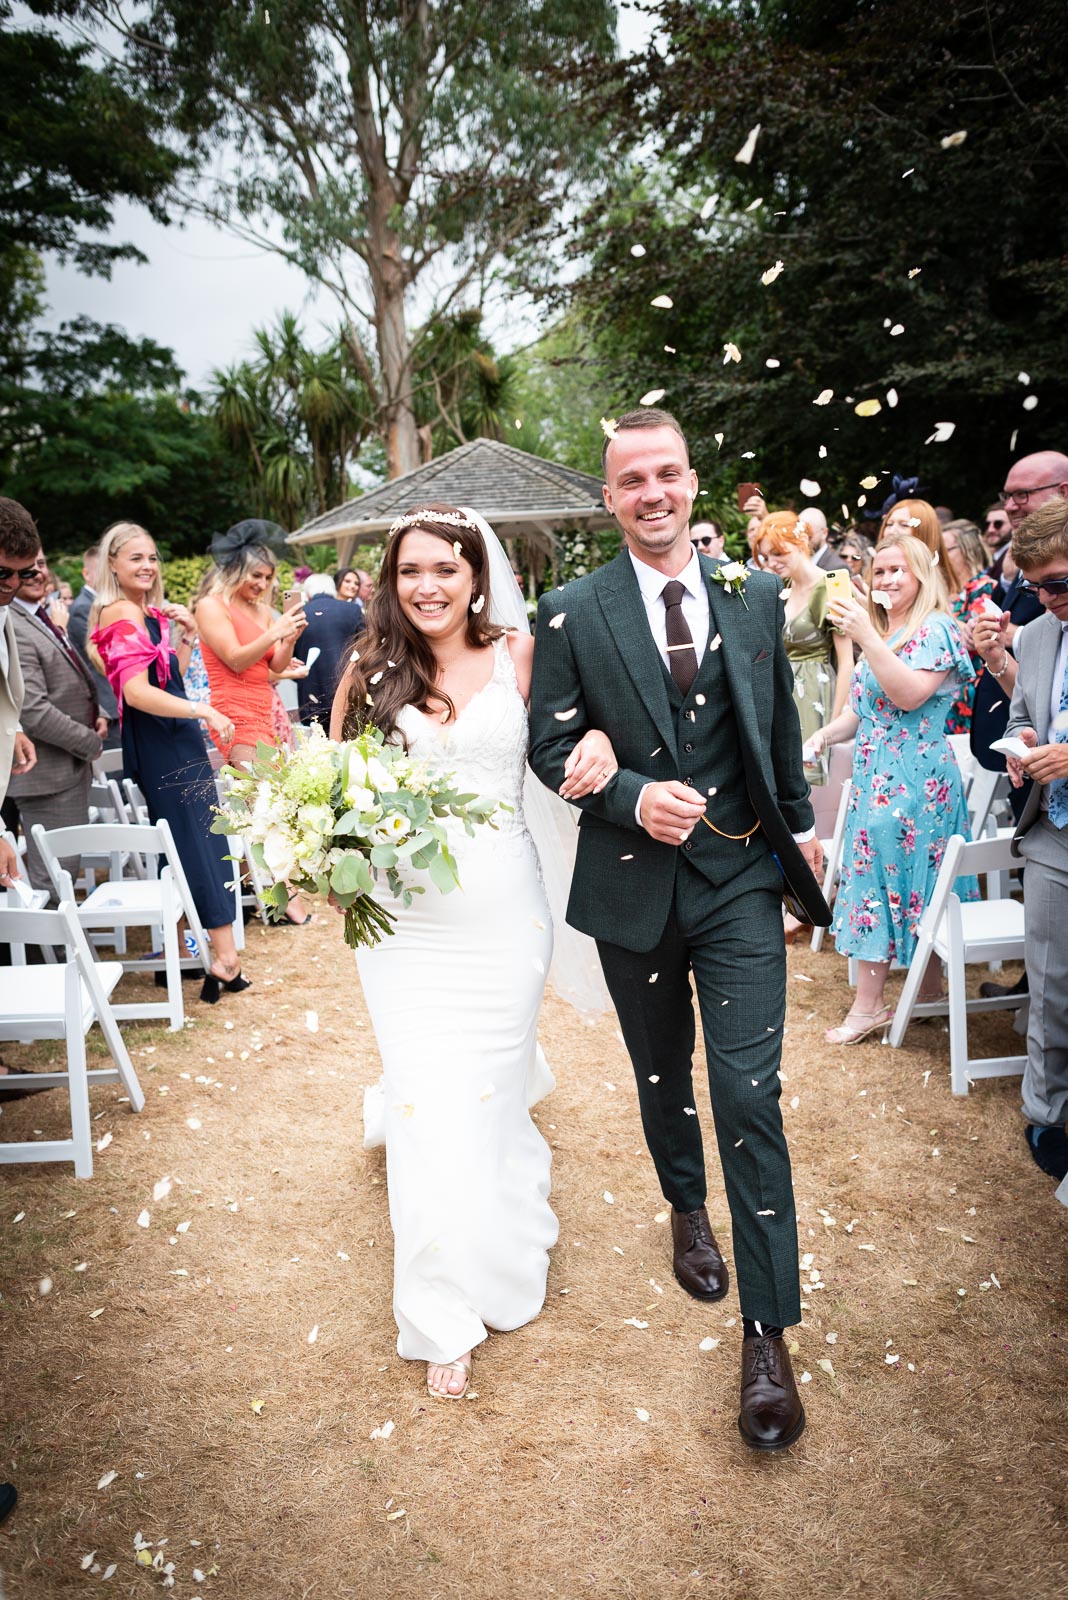 Wedding Photographer for Natalie and Dean at Pelham House in Lewes